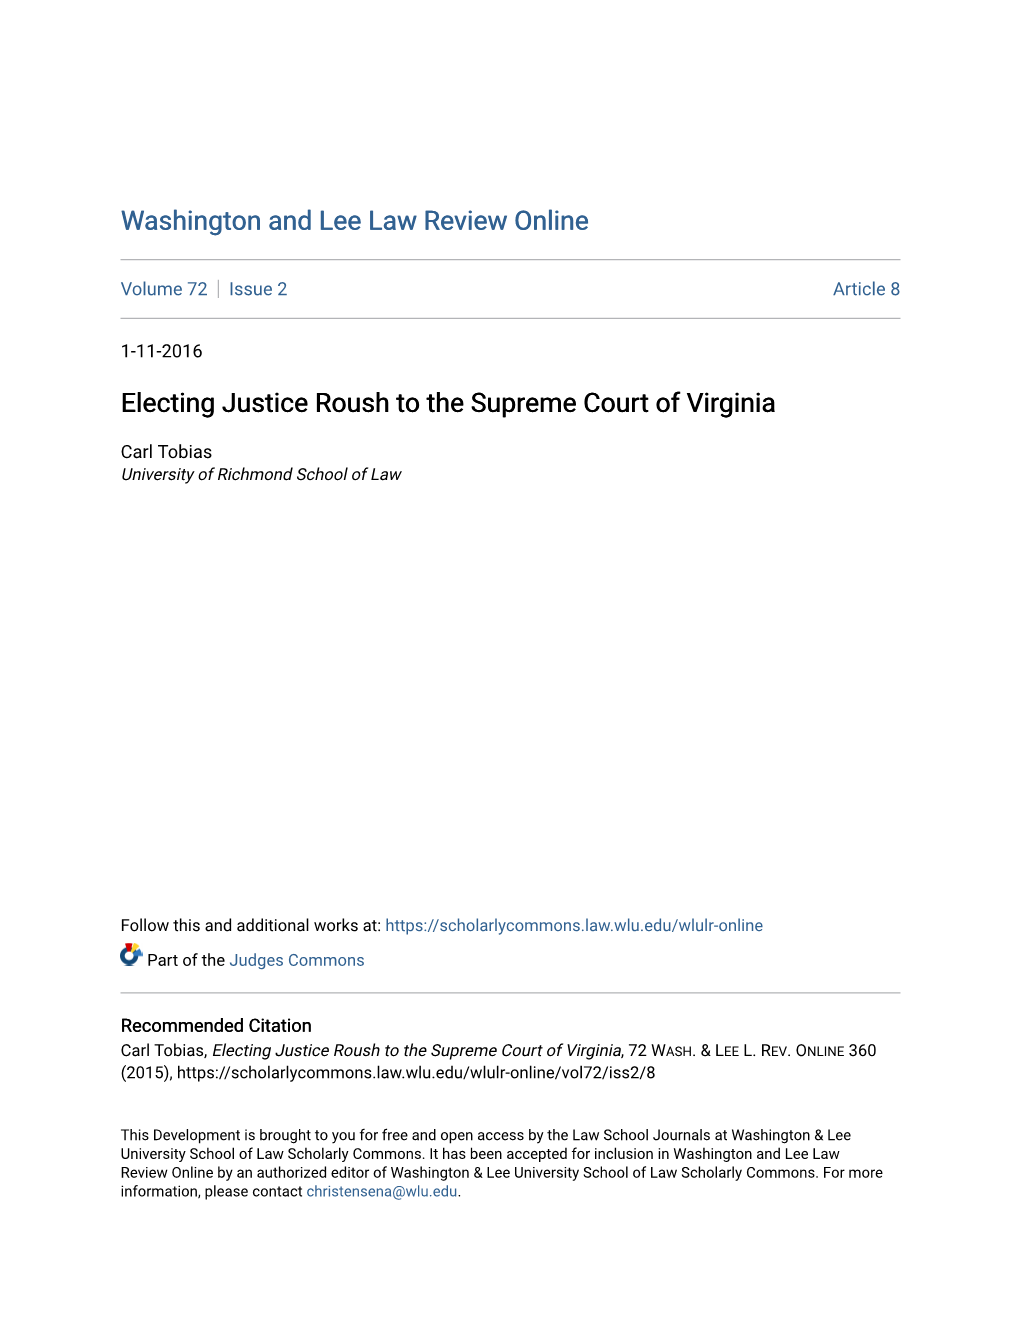 Electing Justice Roush to the Supreme Court of Virginia